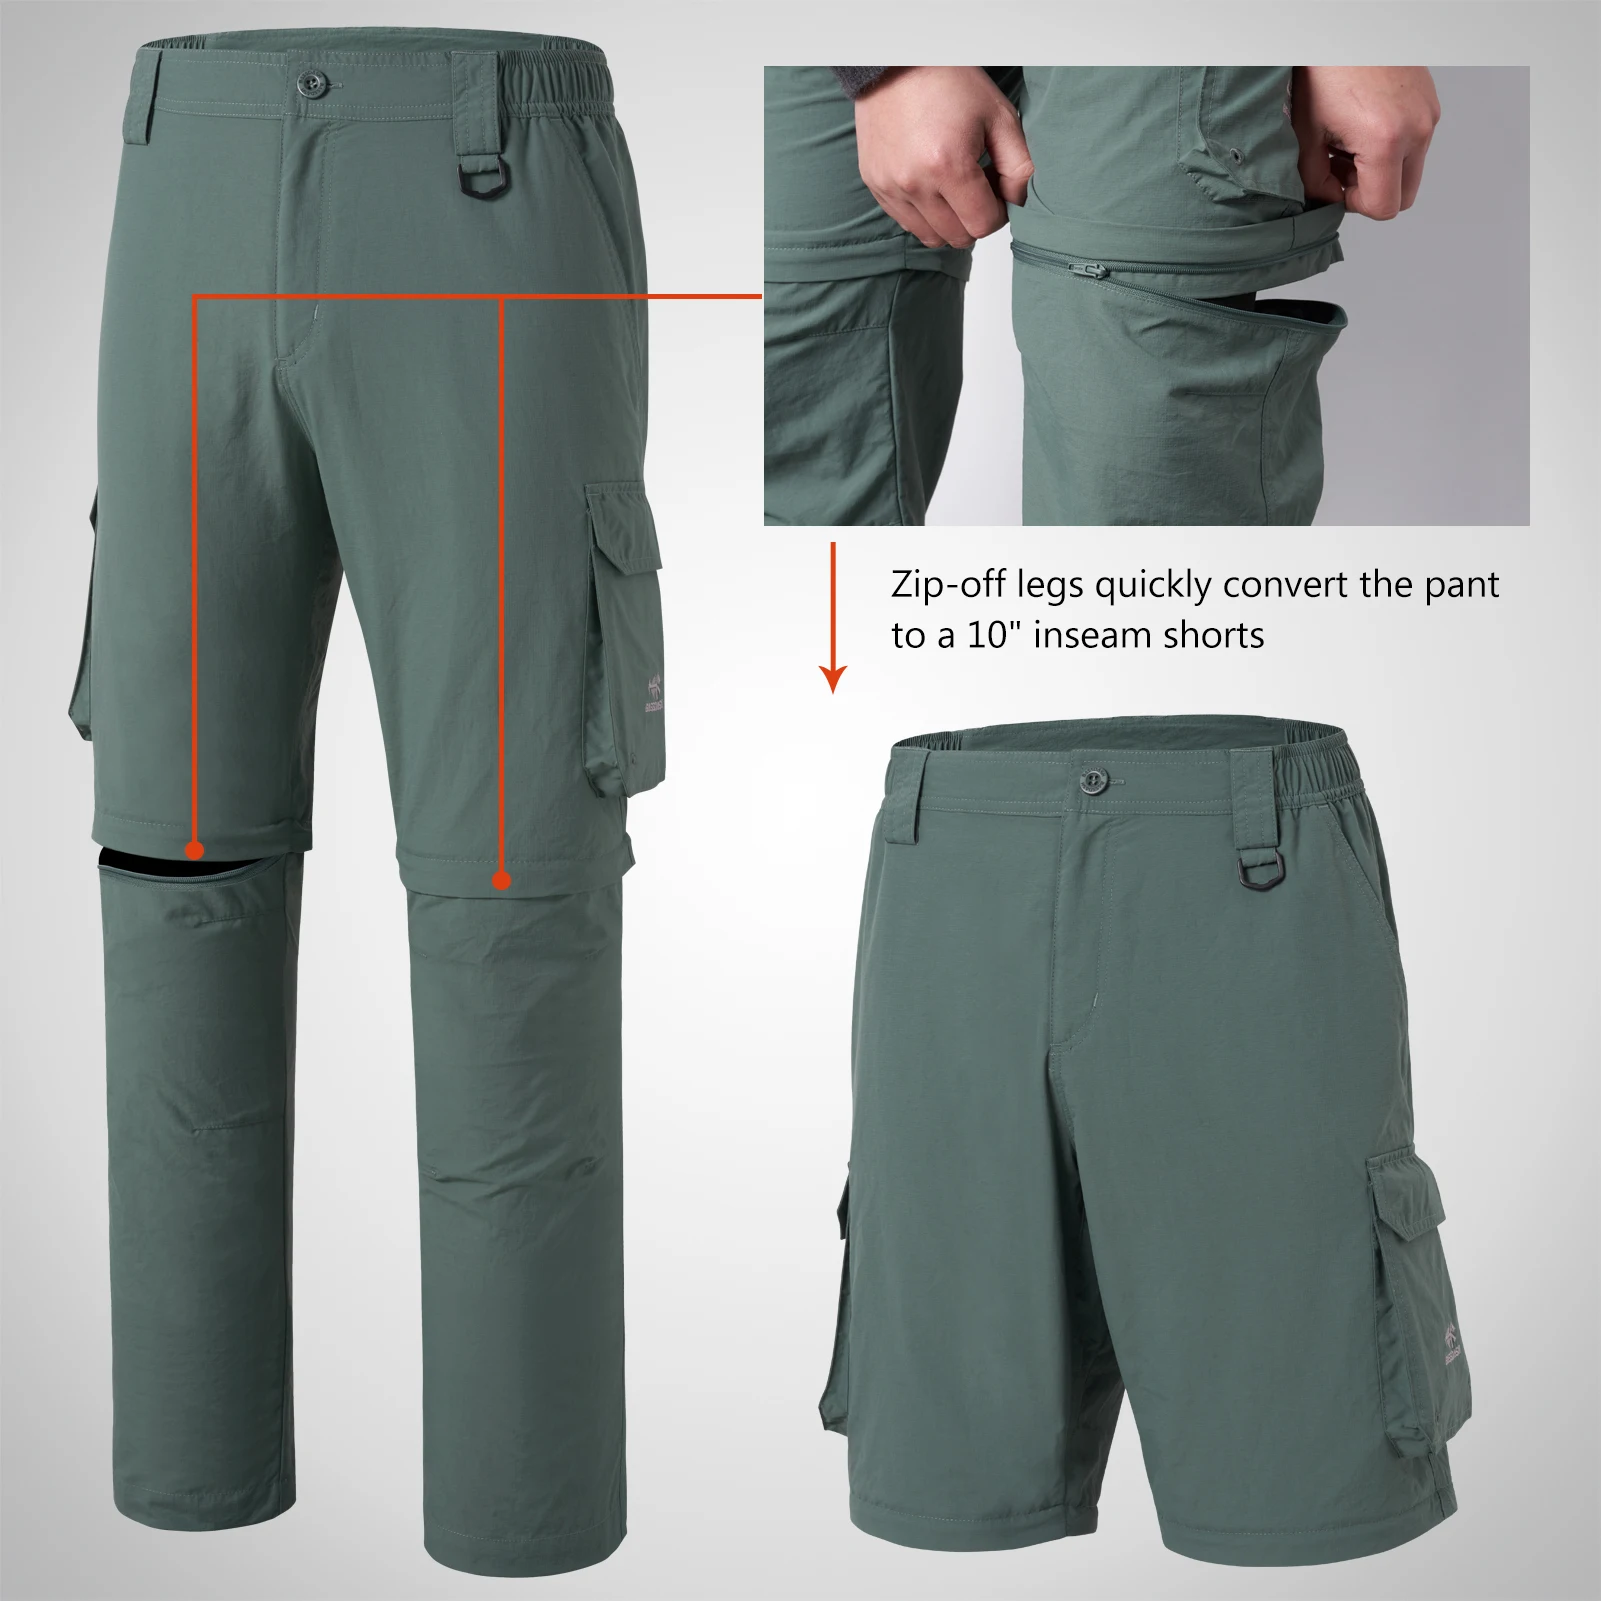 BASSDASH Summer Convertible Pants For Men Quick Dry Trousers Zip-Off Water  Resistant Fishing Hunting UPF50+ SD1 - AliExpress